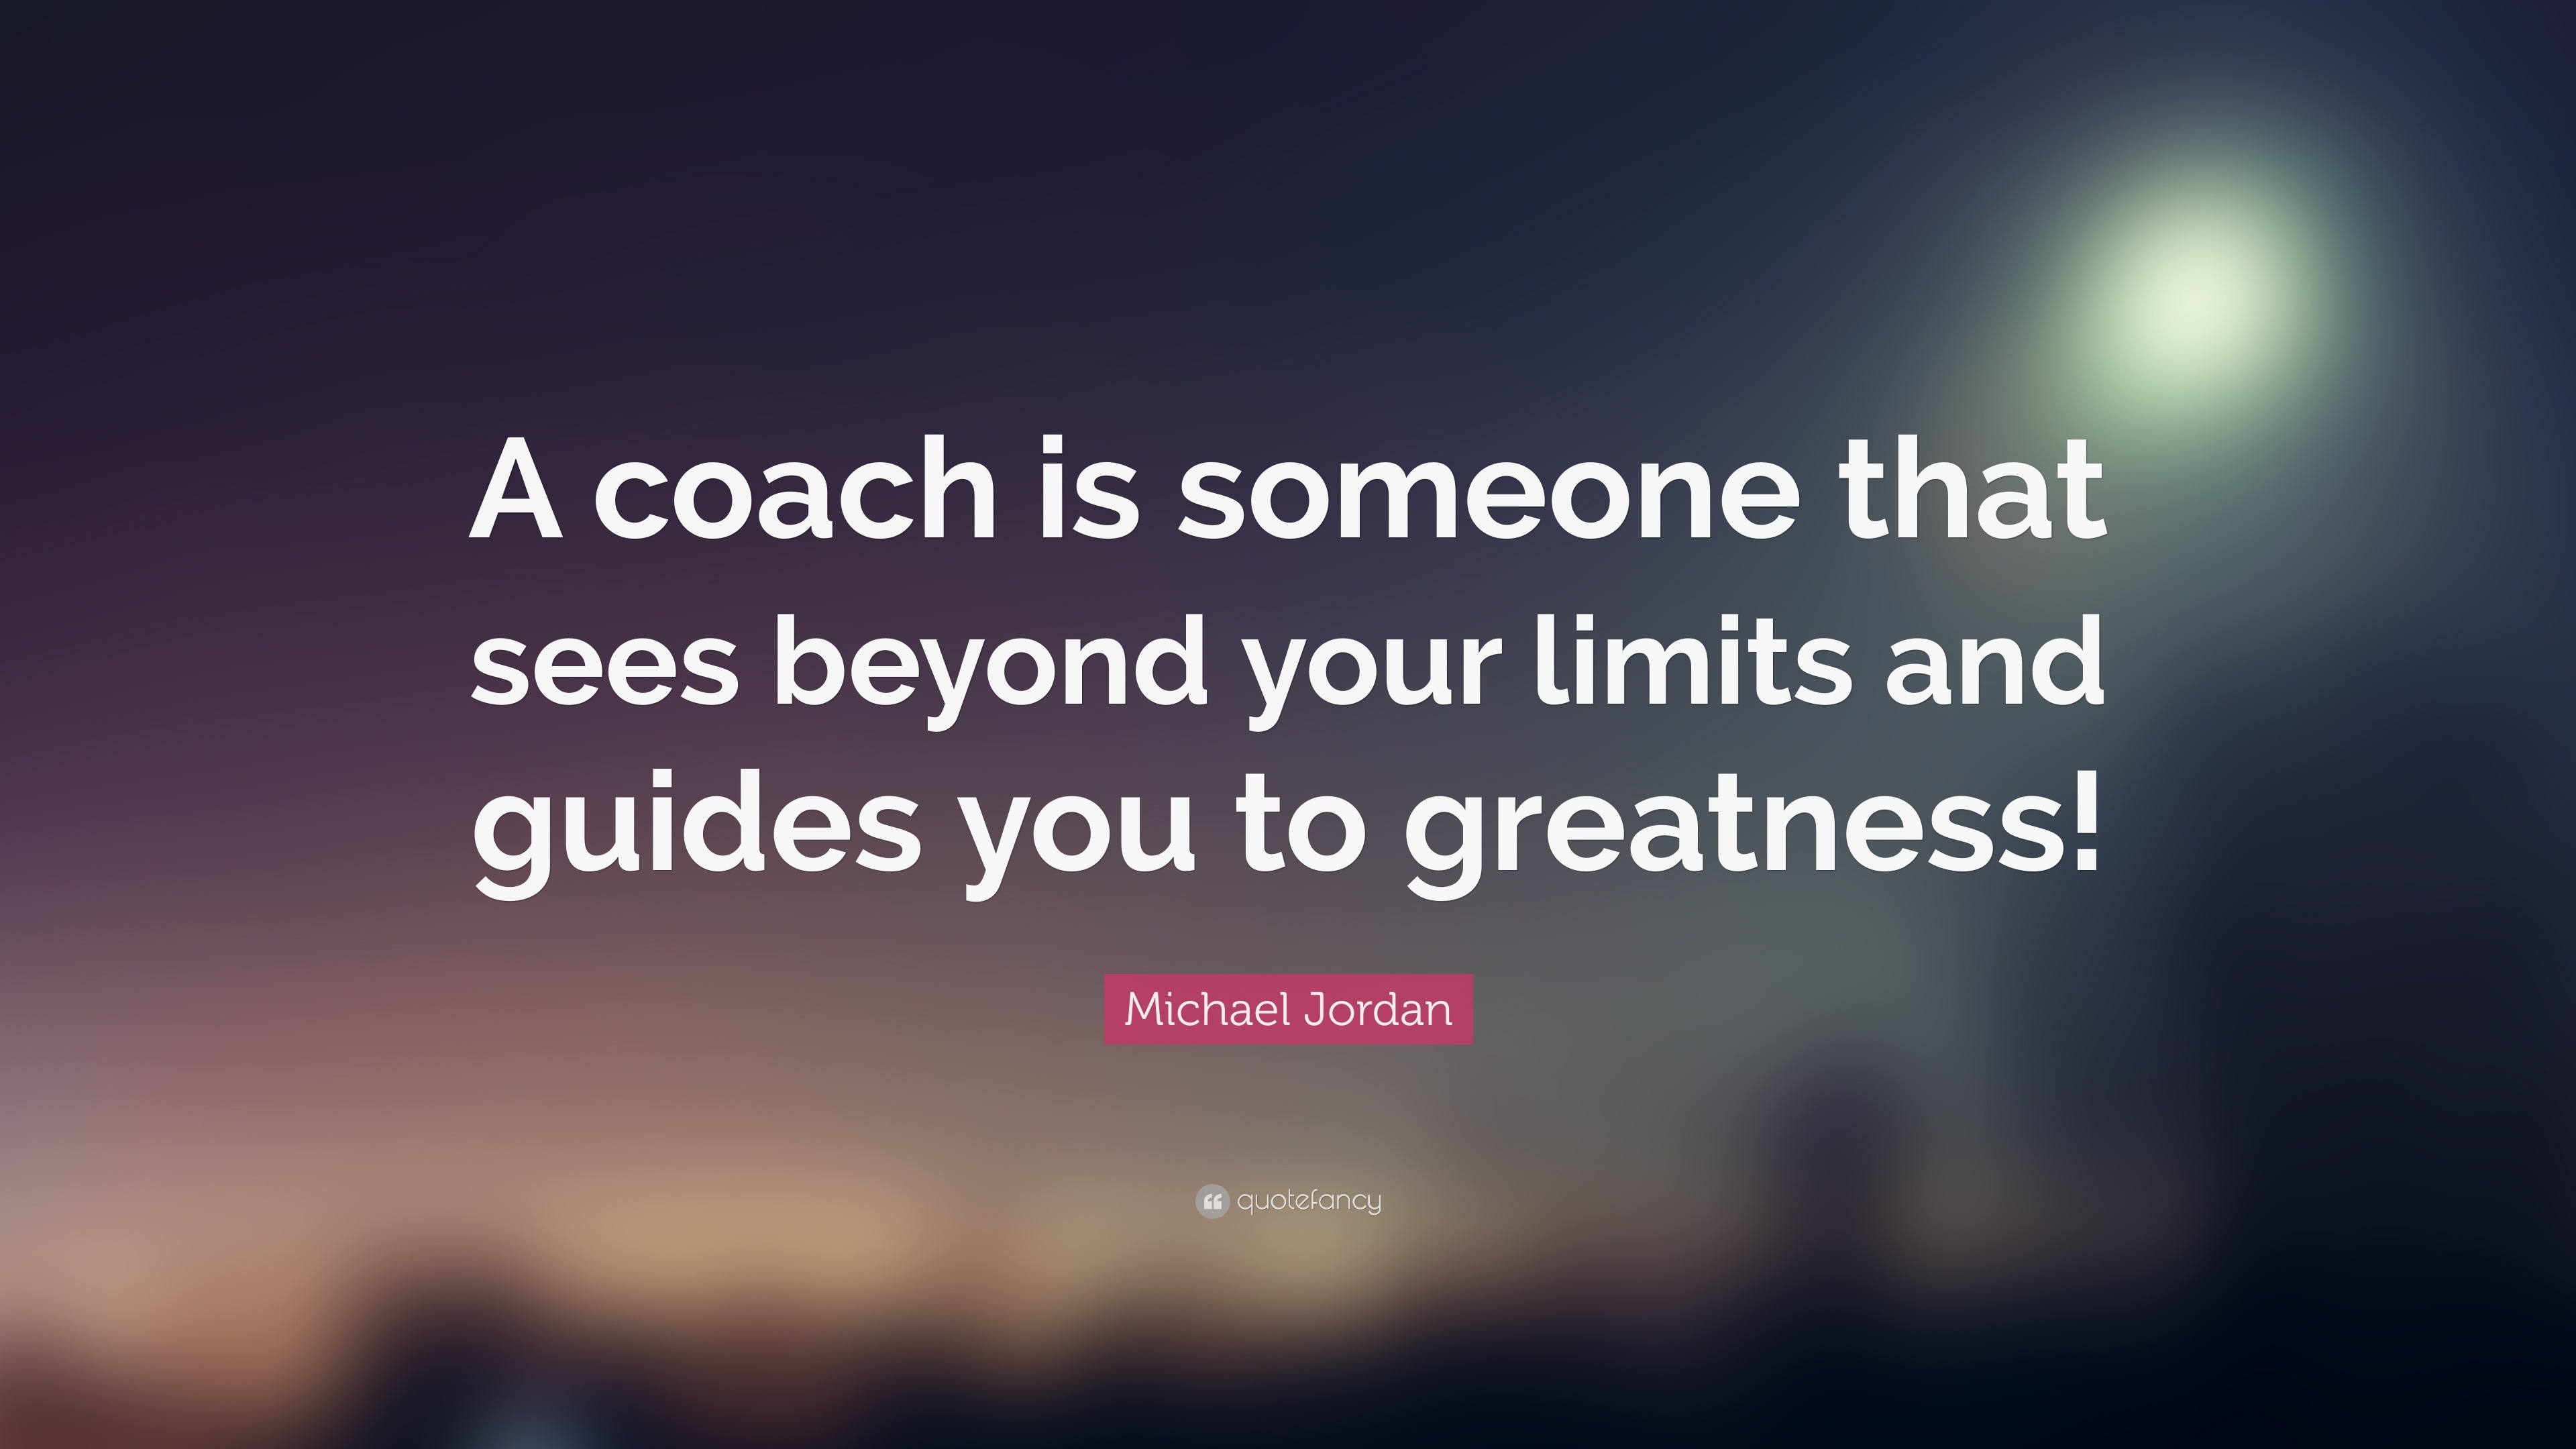 Michael Jordan Quote: “A coach is someone that sees beyond your limits and  guides you to